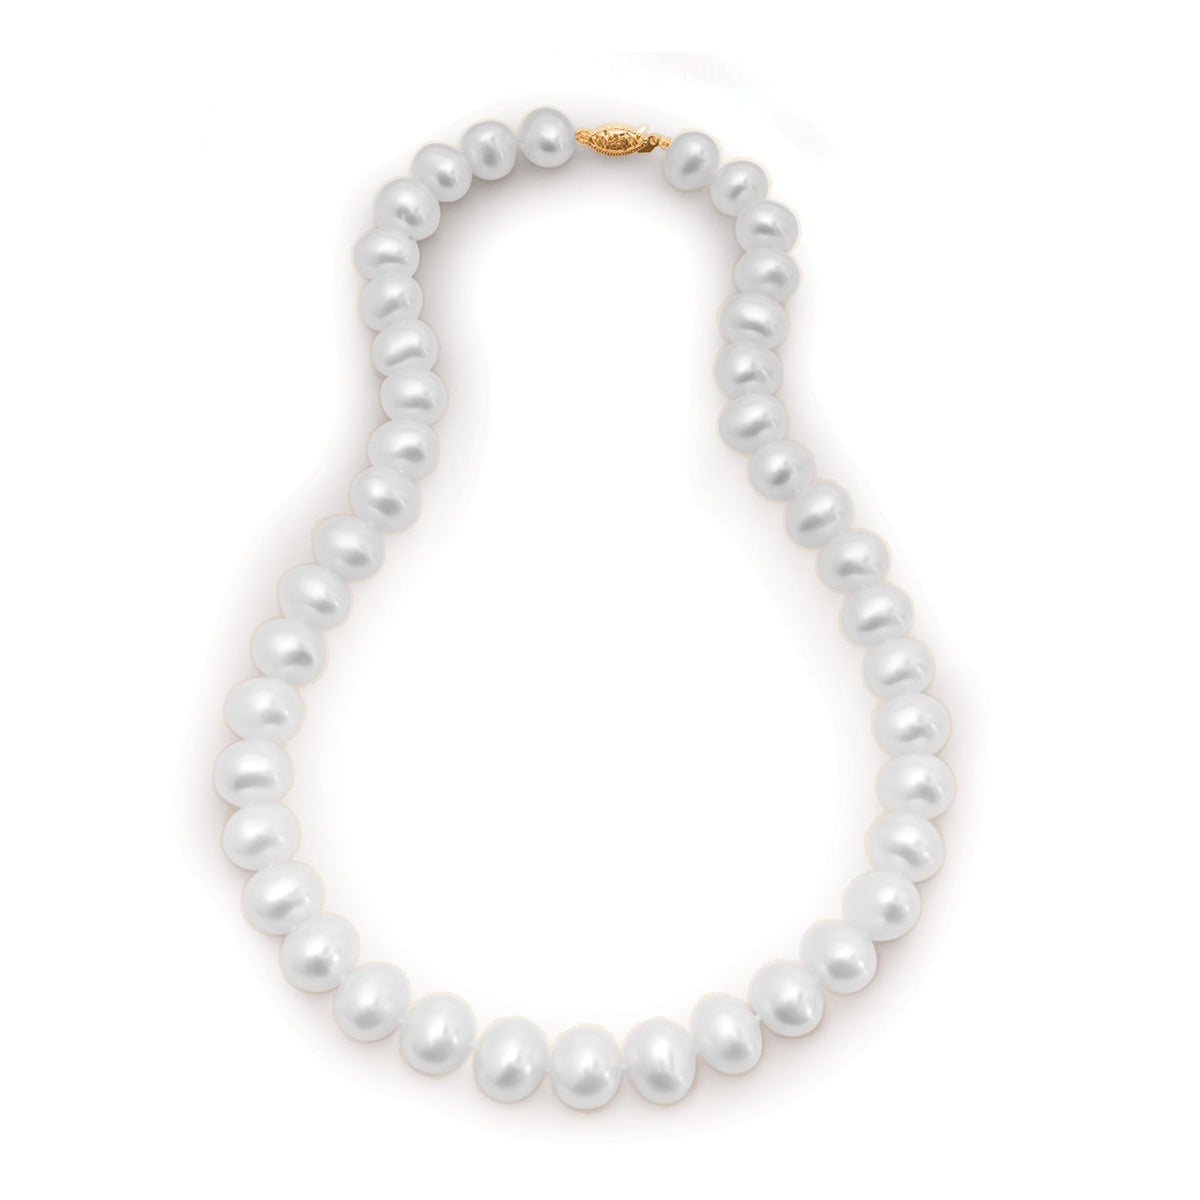 Gold Freshwater Pearl Necklace - Pearl Jewelry - Apearl